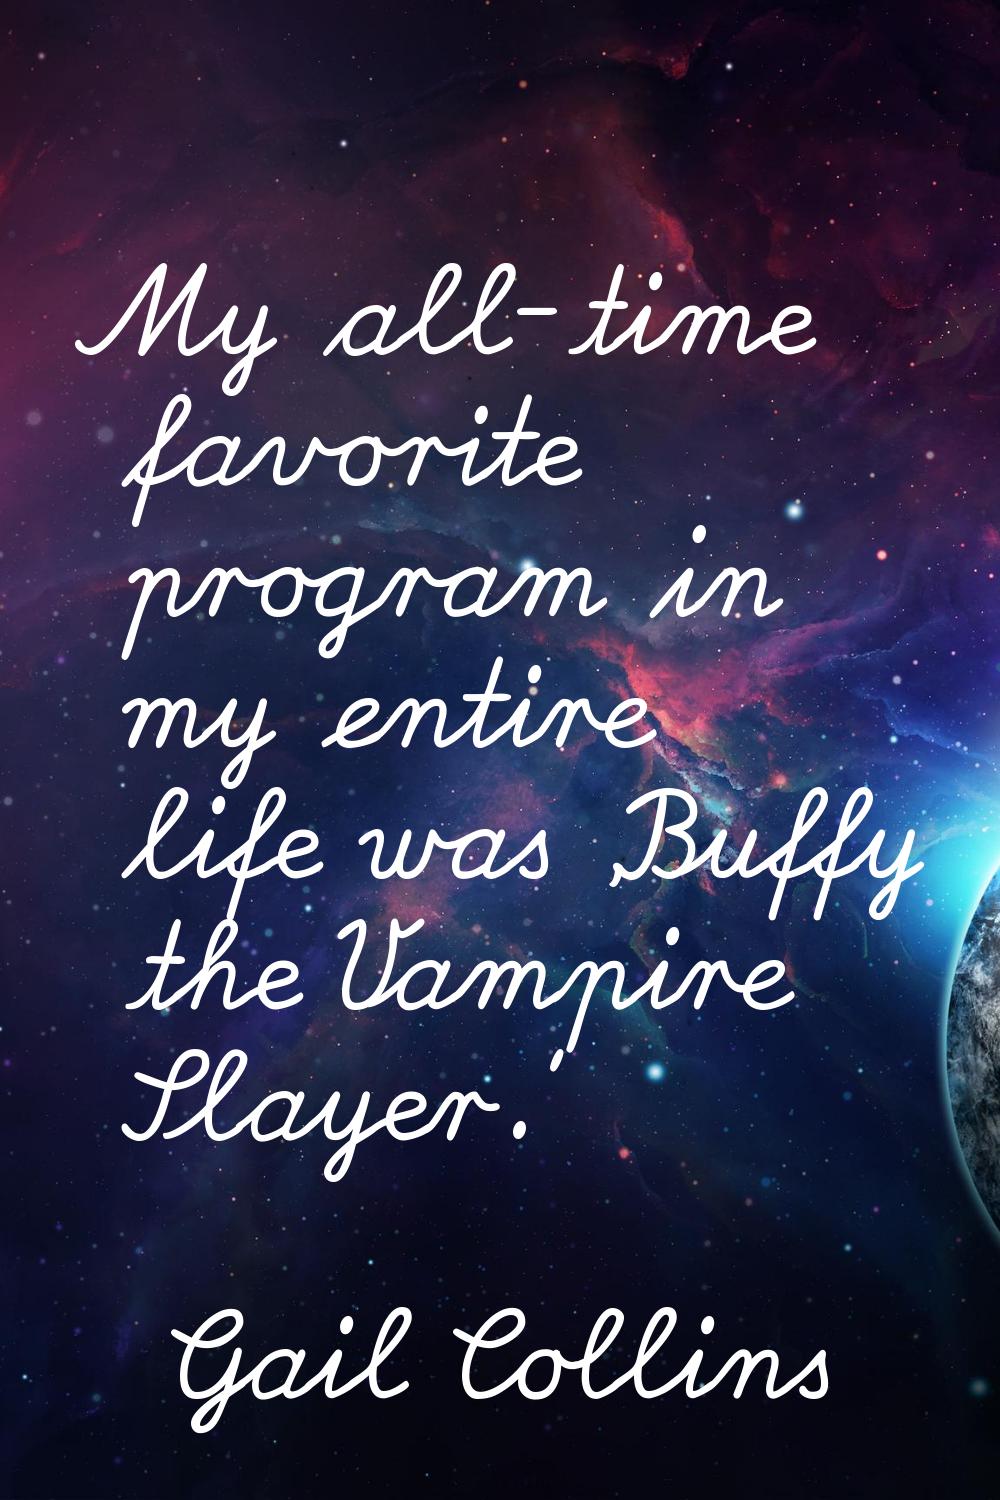 My all-time favorite program in my entire life was 'Buffy the Vampire Slayer.'